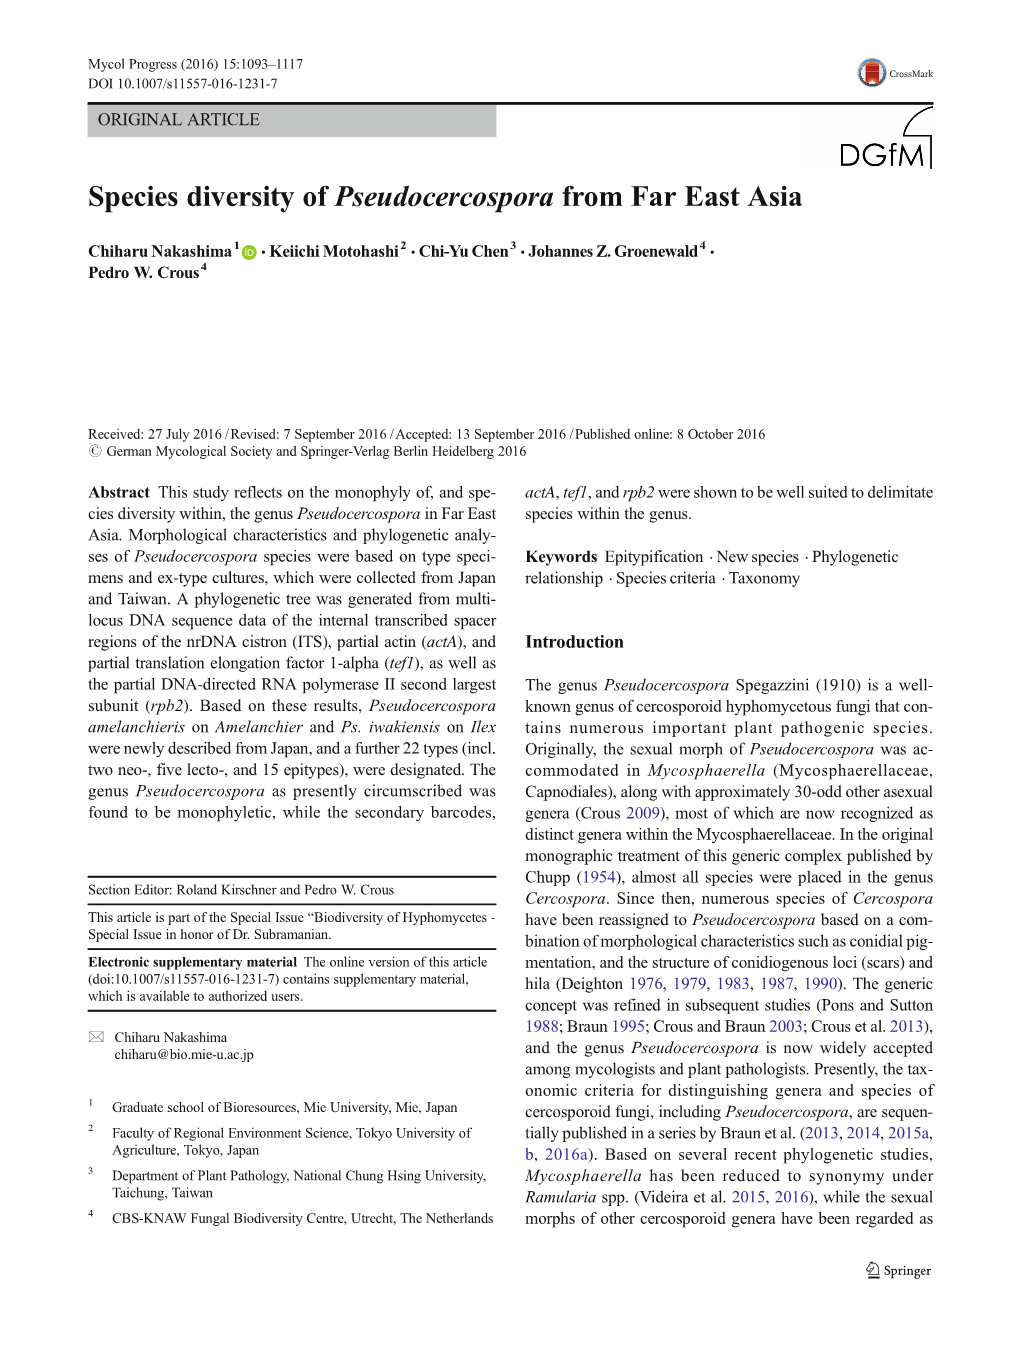 Species Diversity of Pseudocercospora from Far East Asia